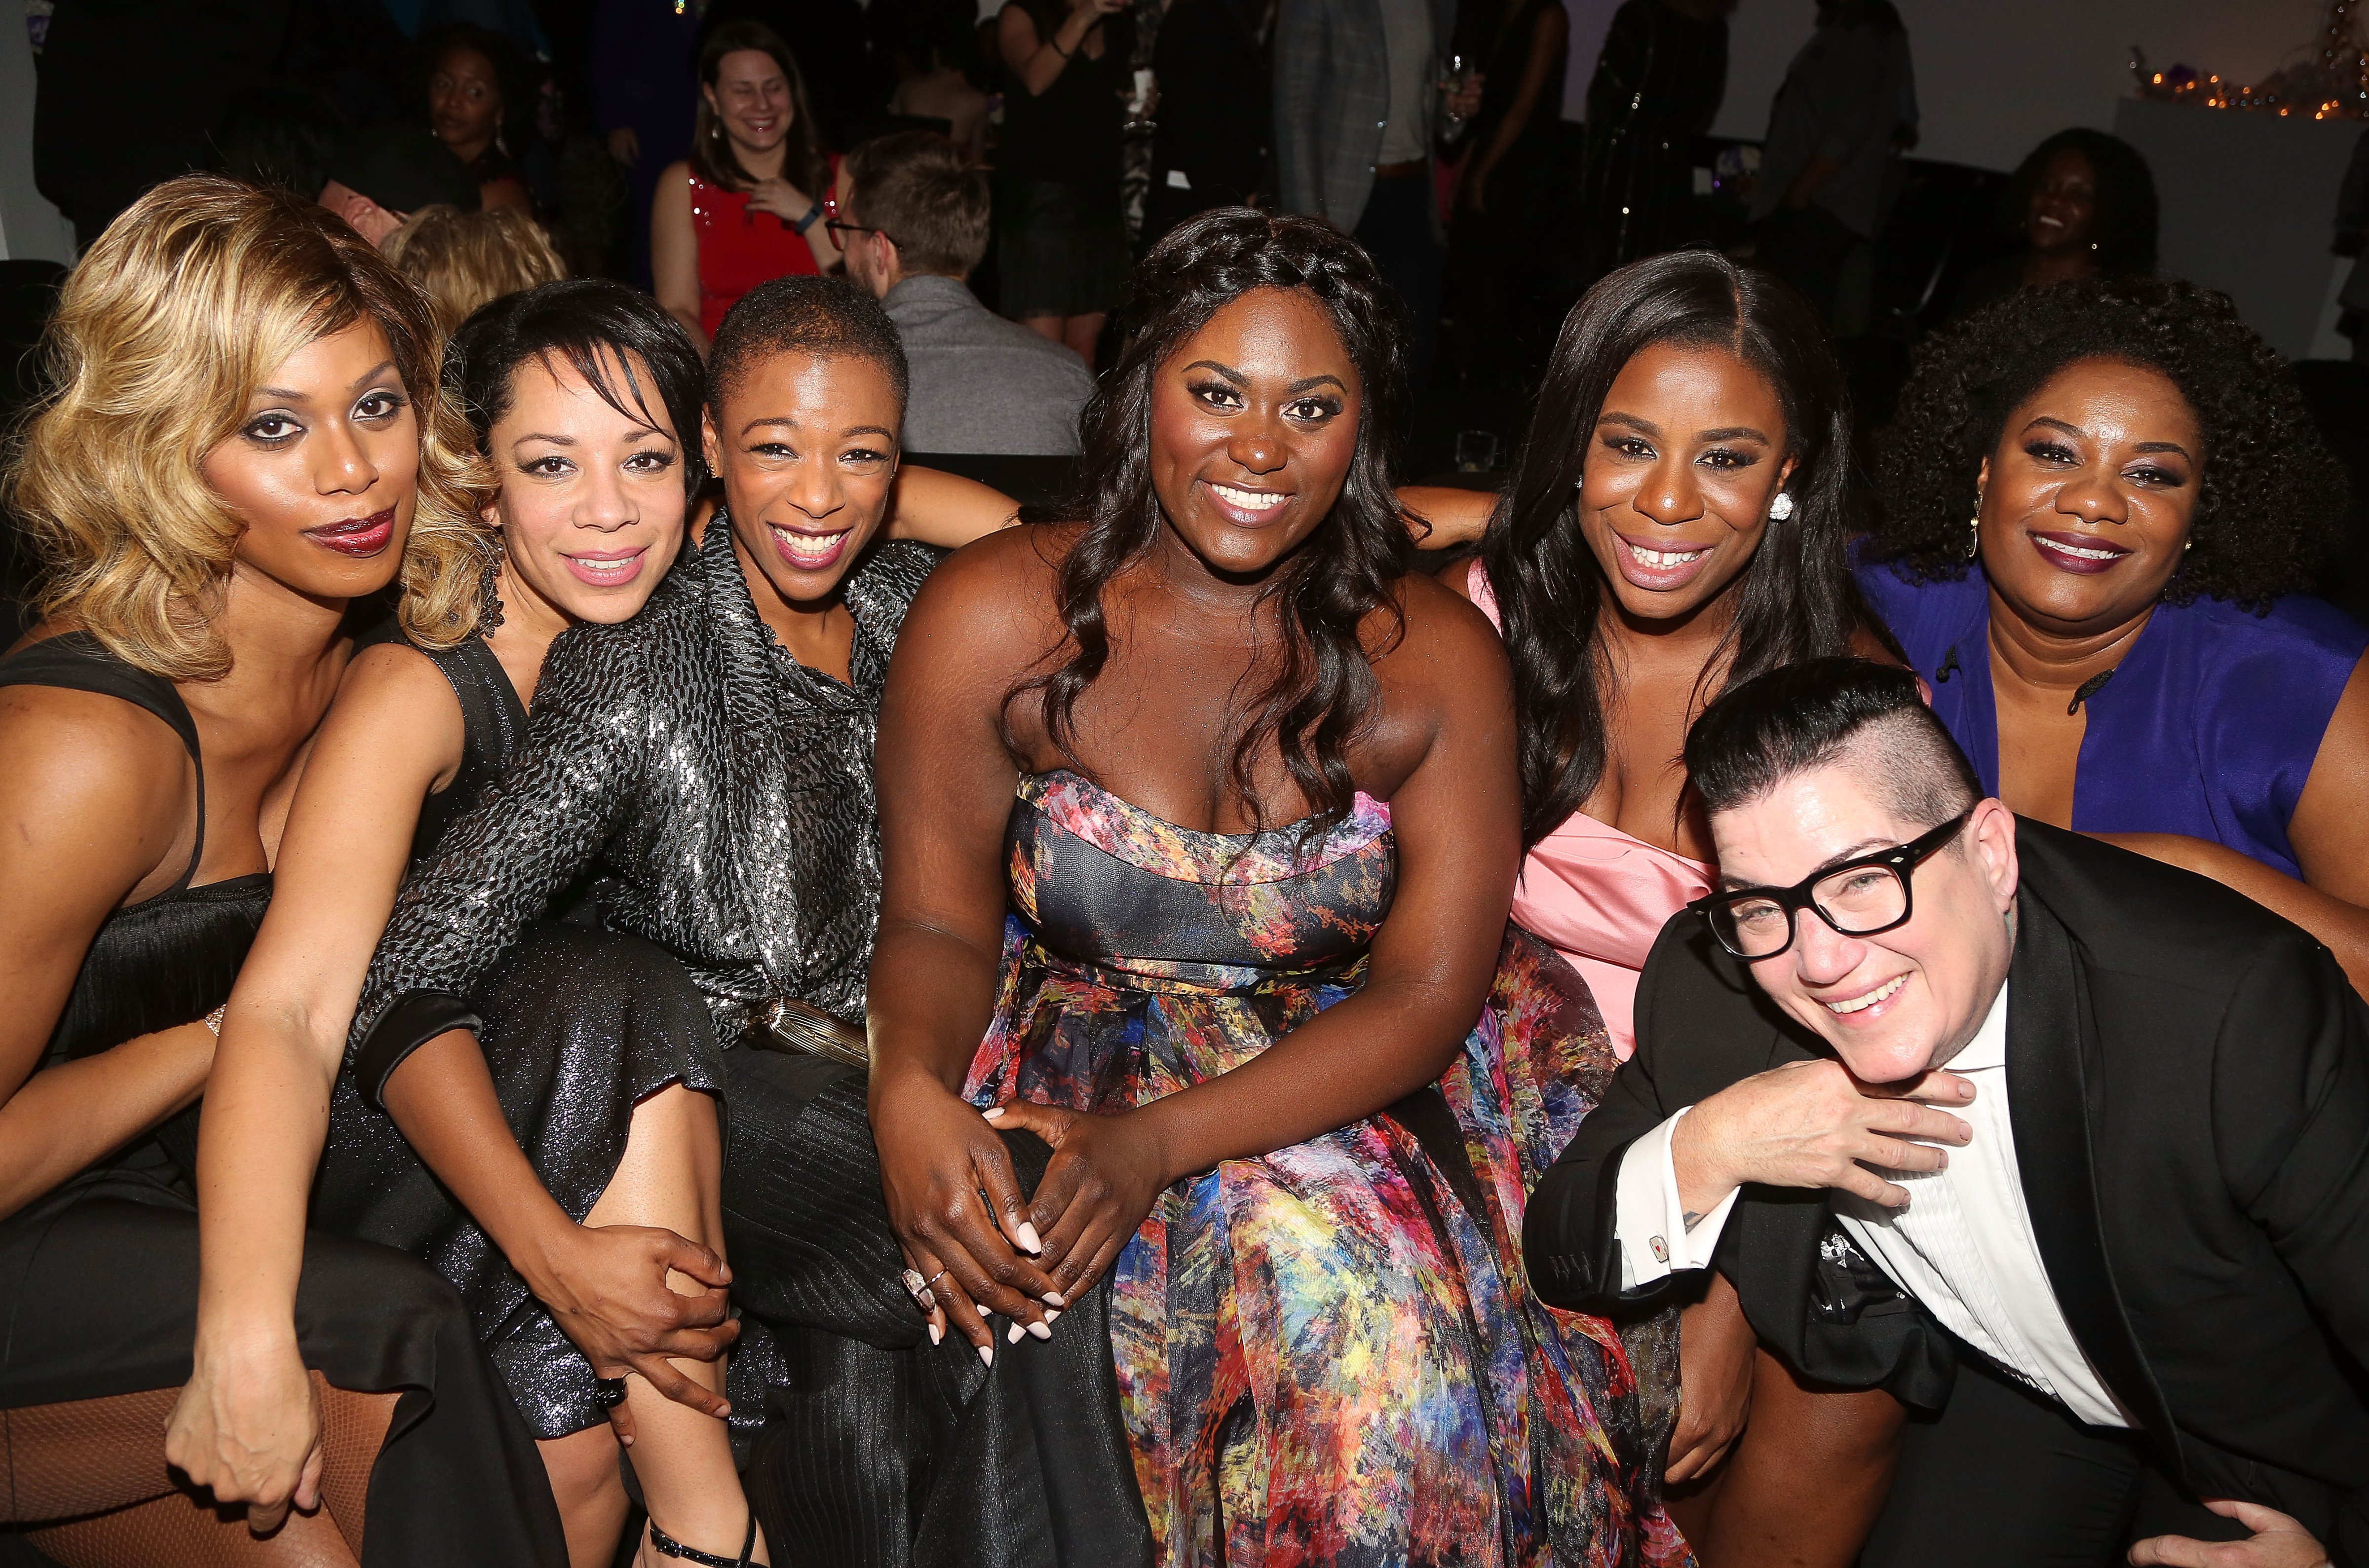 (L-R)'Orange is The New Black' stars Laverne Cox, Selenis Leyva, Samira Wiley, Danielle Brooks, Uzo Aduba, Lea DeLaria and Adrienne Moore pose at the opening night after party for 'The Color Purple' on Broadway on Dec. 10, 2015 in New York City. (Bruce Glikas—FilmMagic/Getty Images)